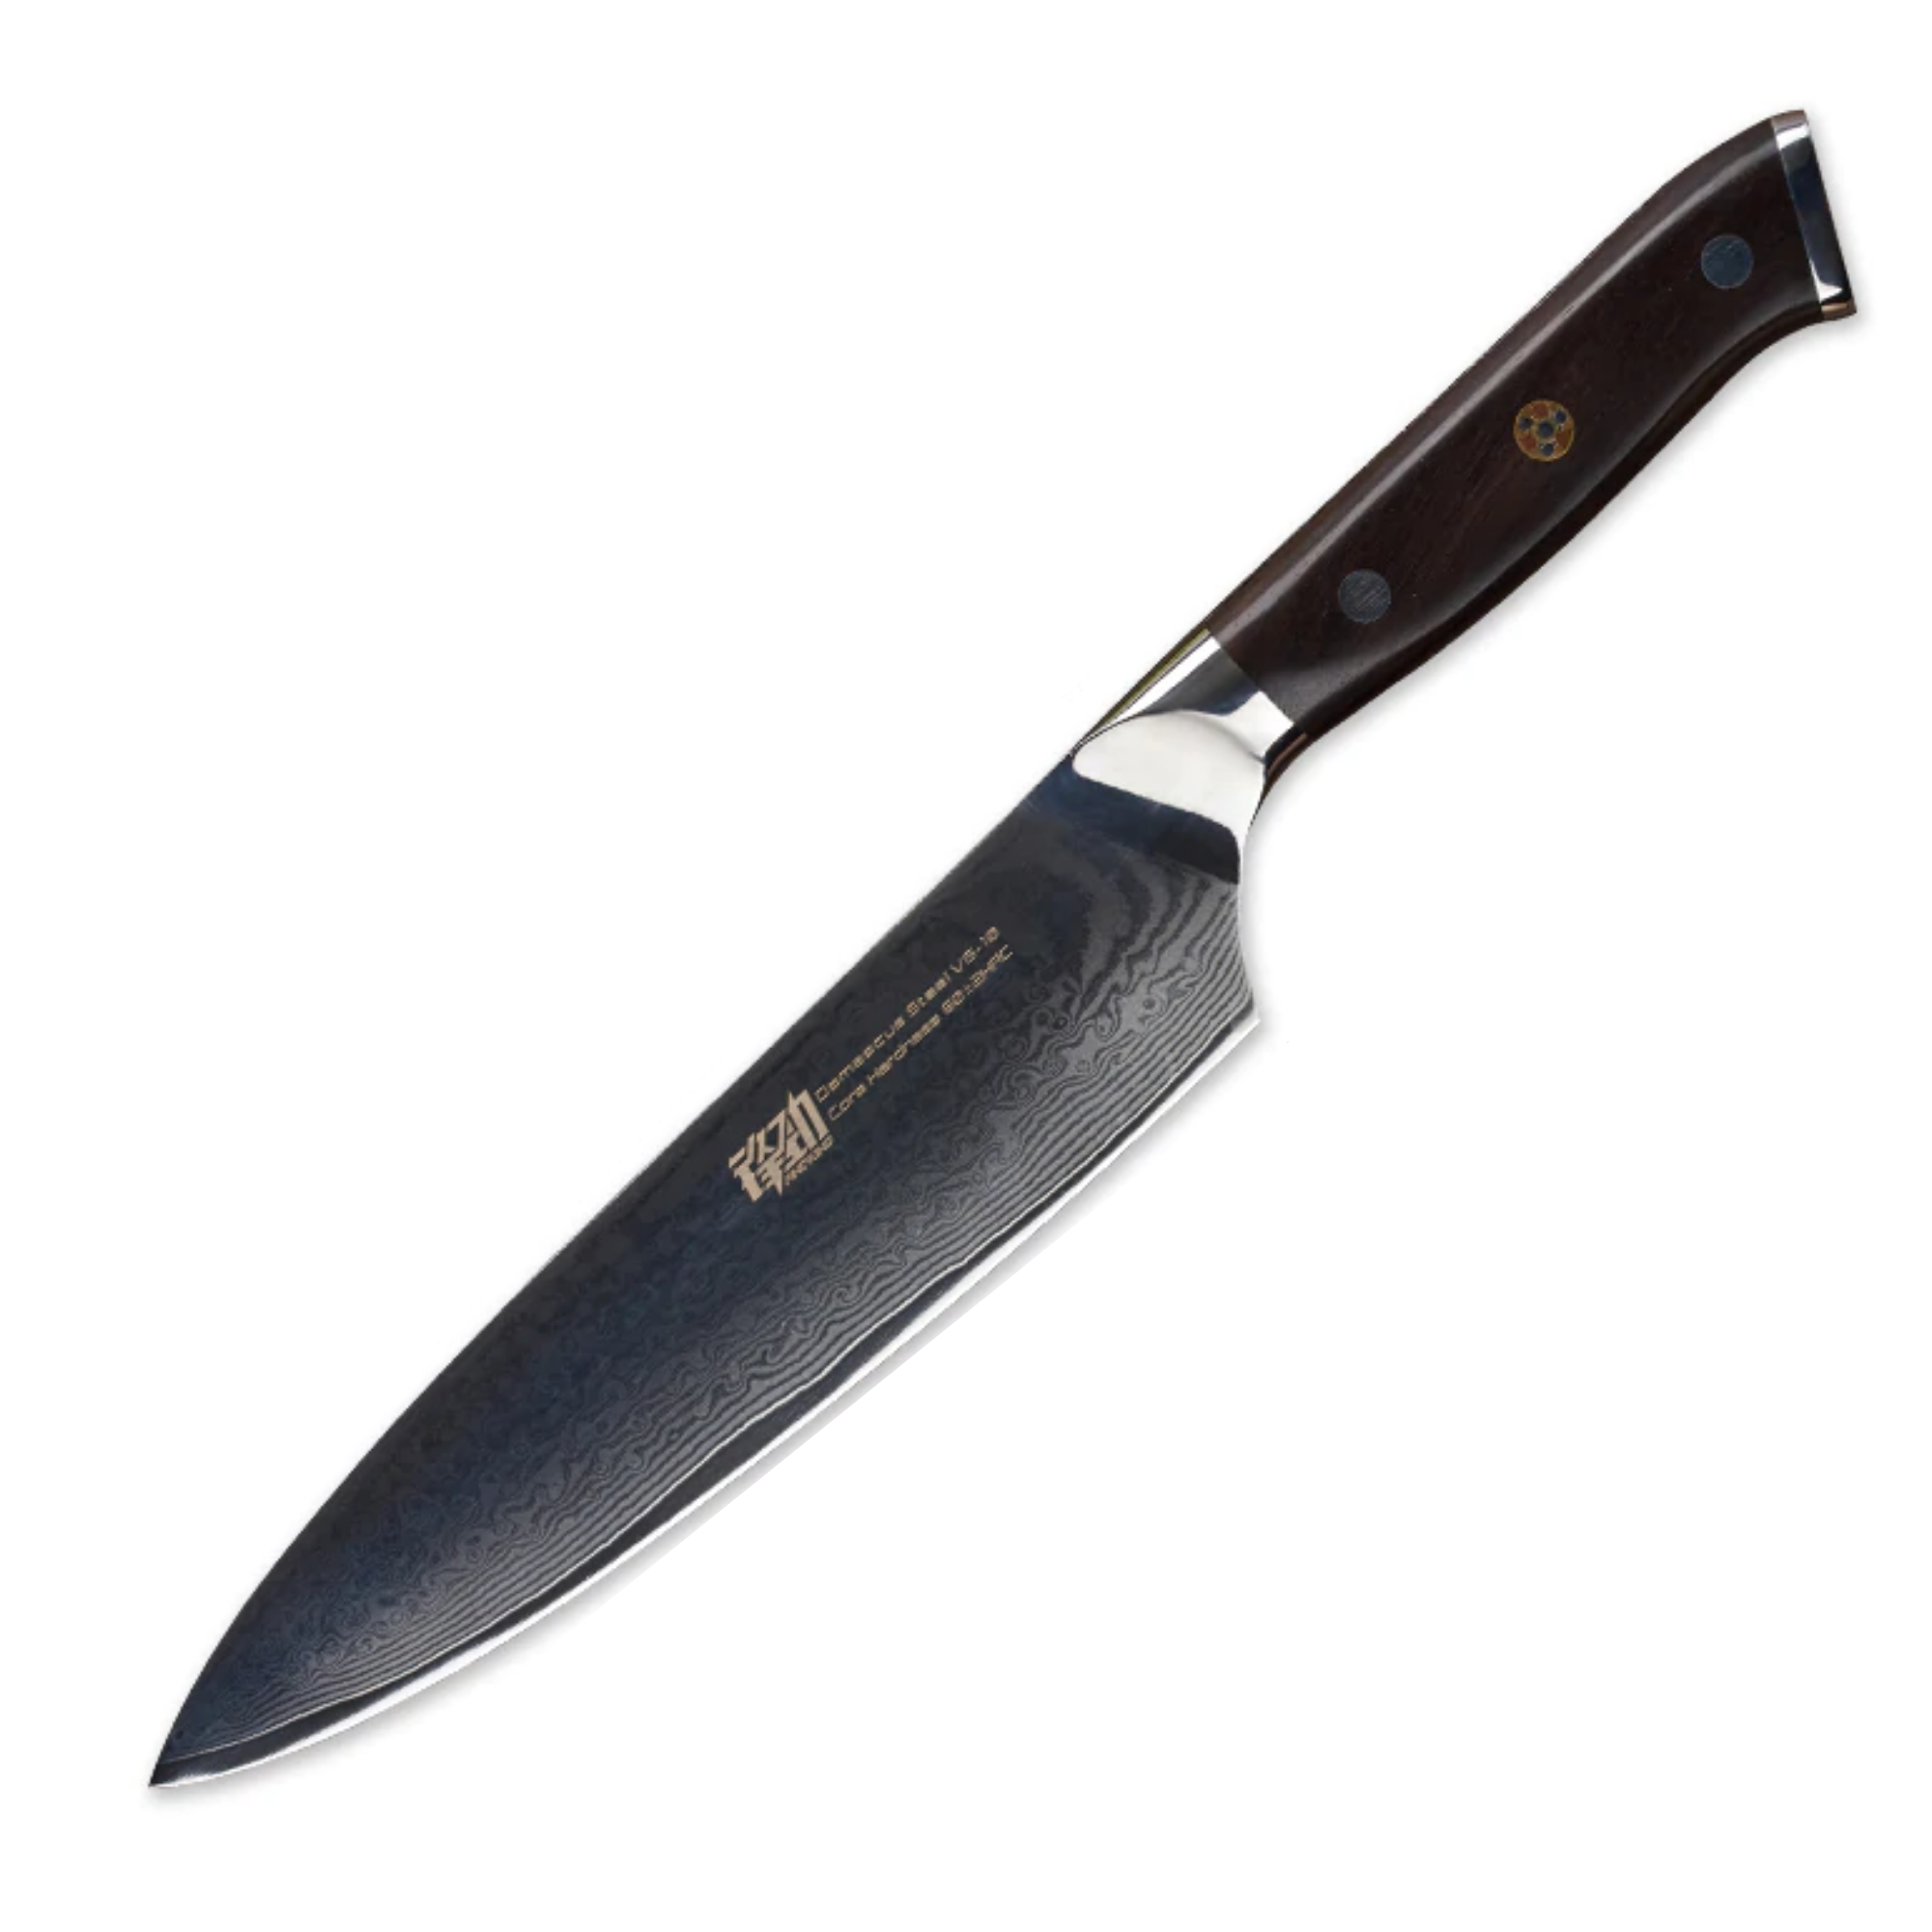 Contoured Damascus Chef Knife with an Ebony Wood Handle - 8 inch / 20cm